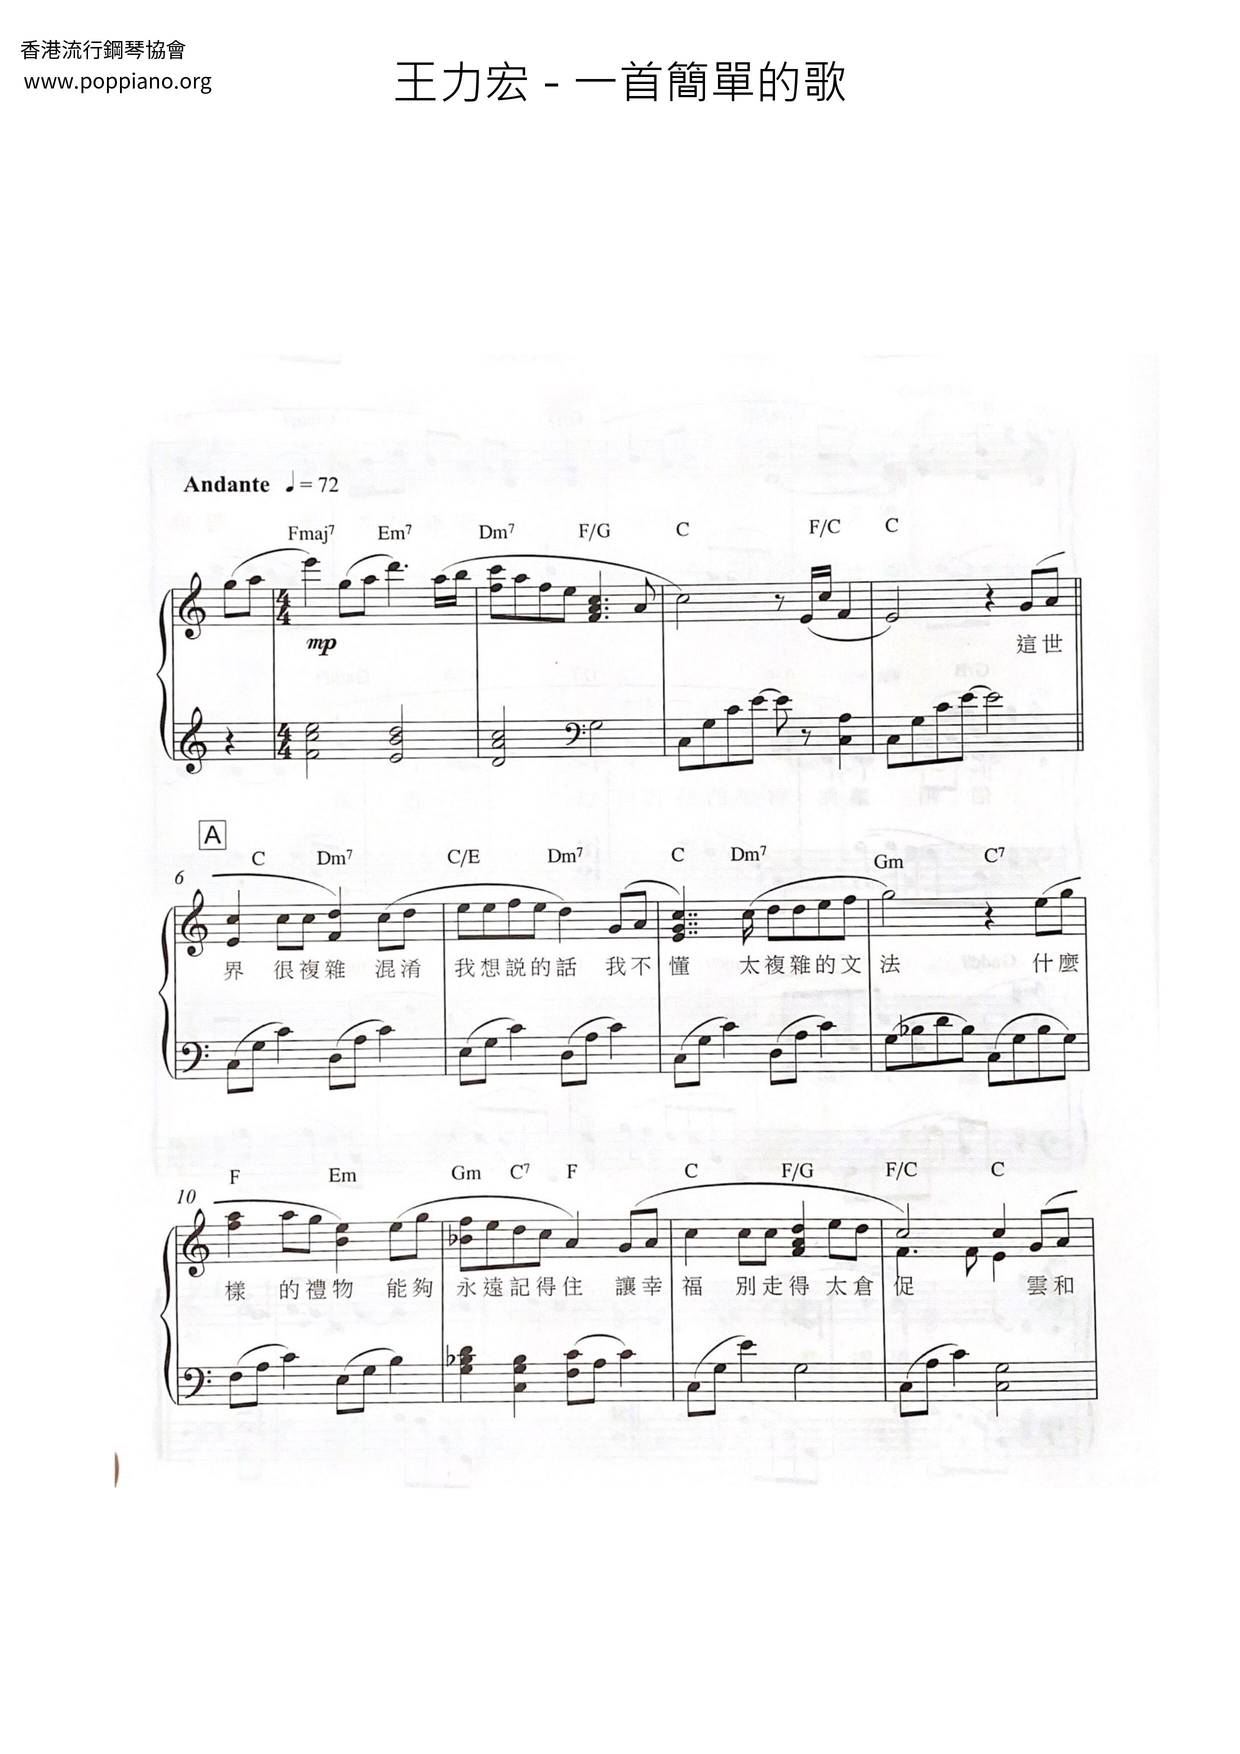 A Simple Song Score